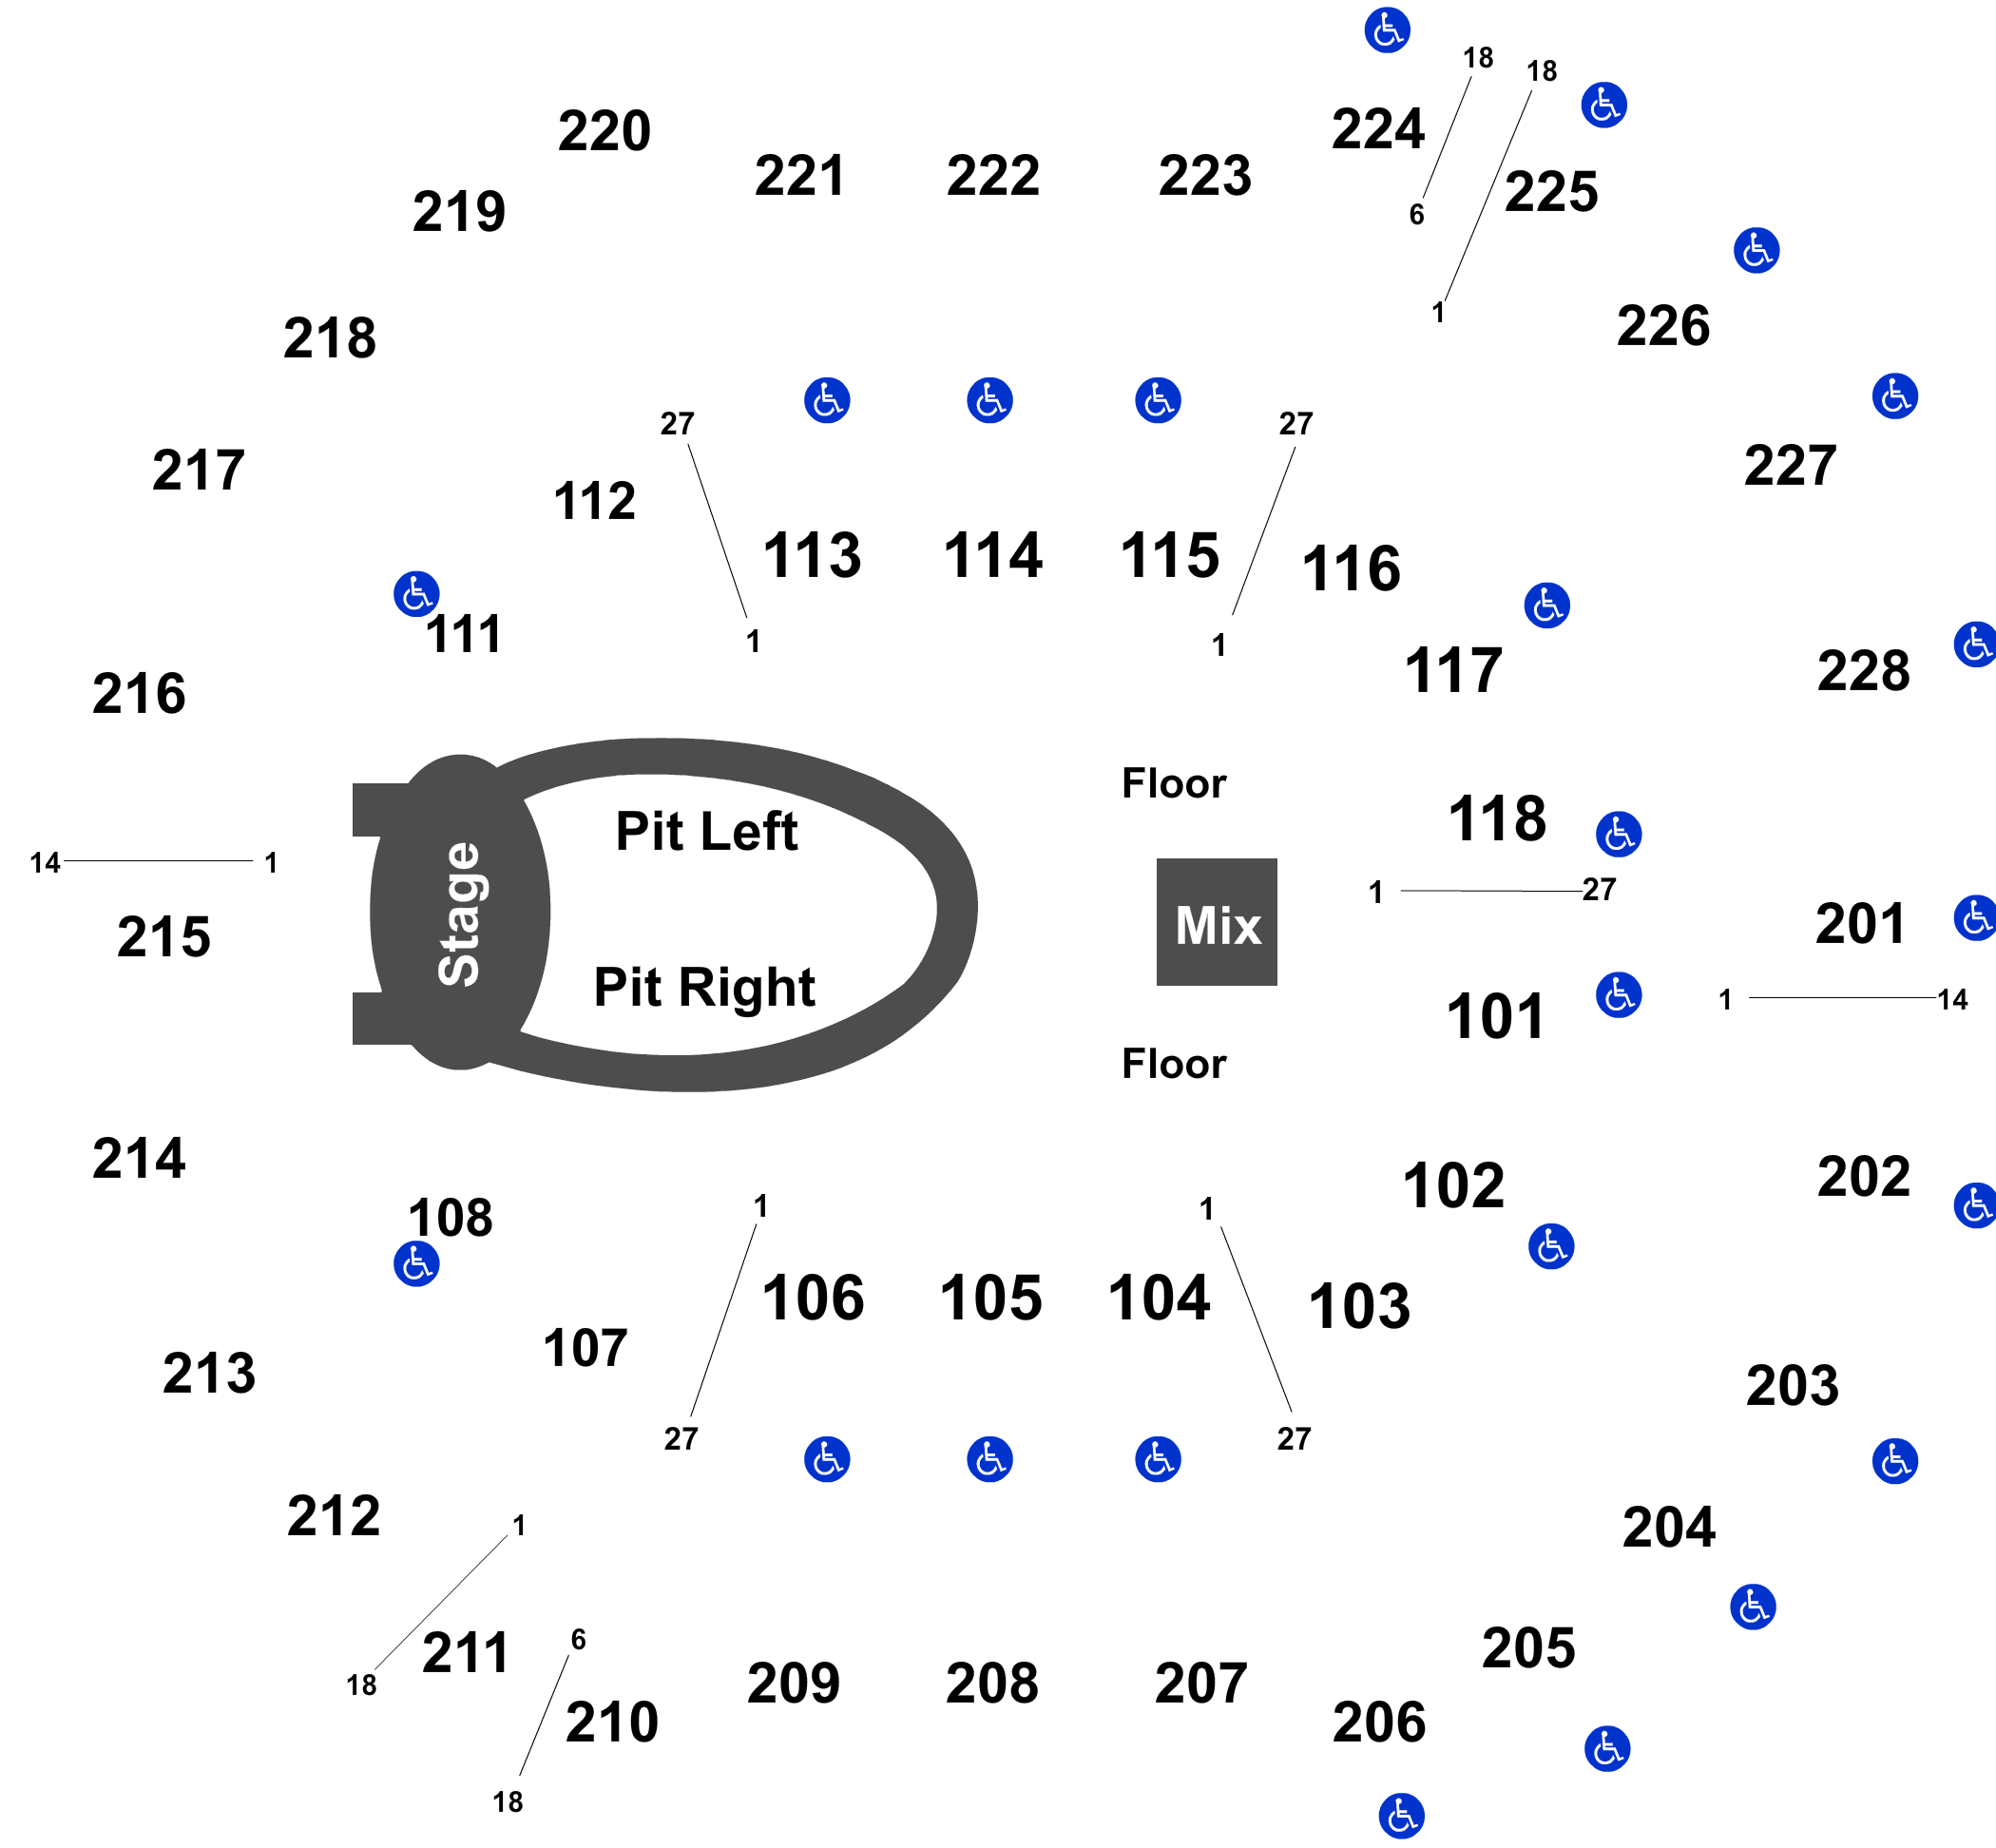 Seating Chart For Colonial Life Arena Columbia Sc